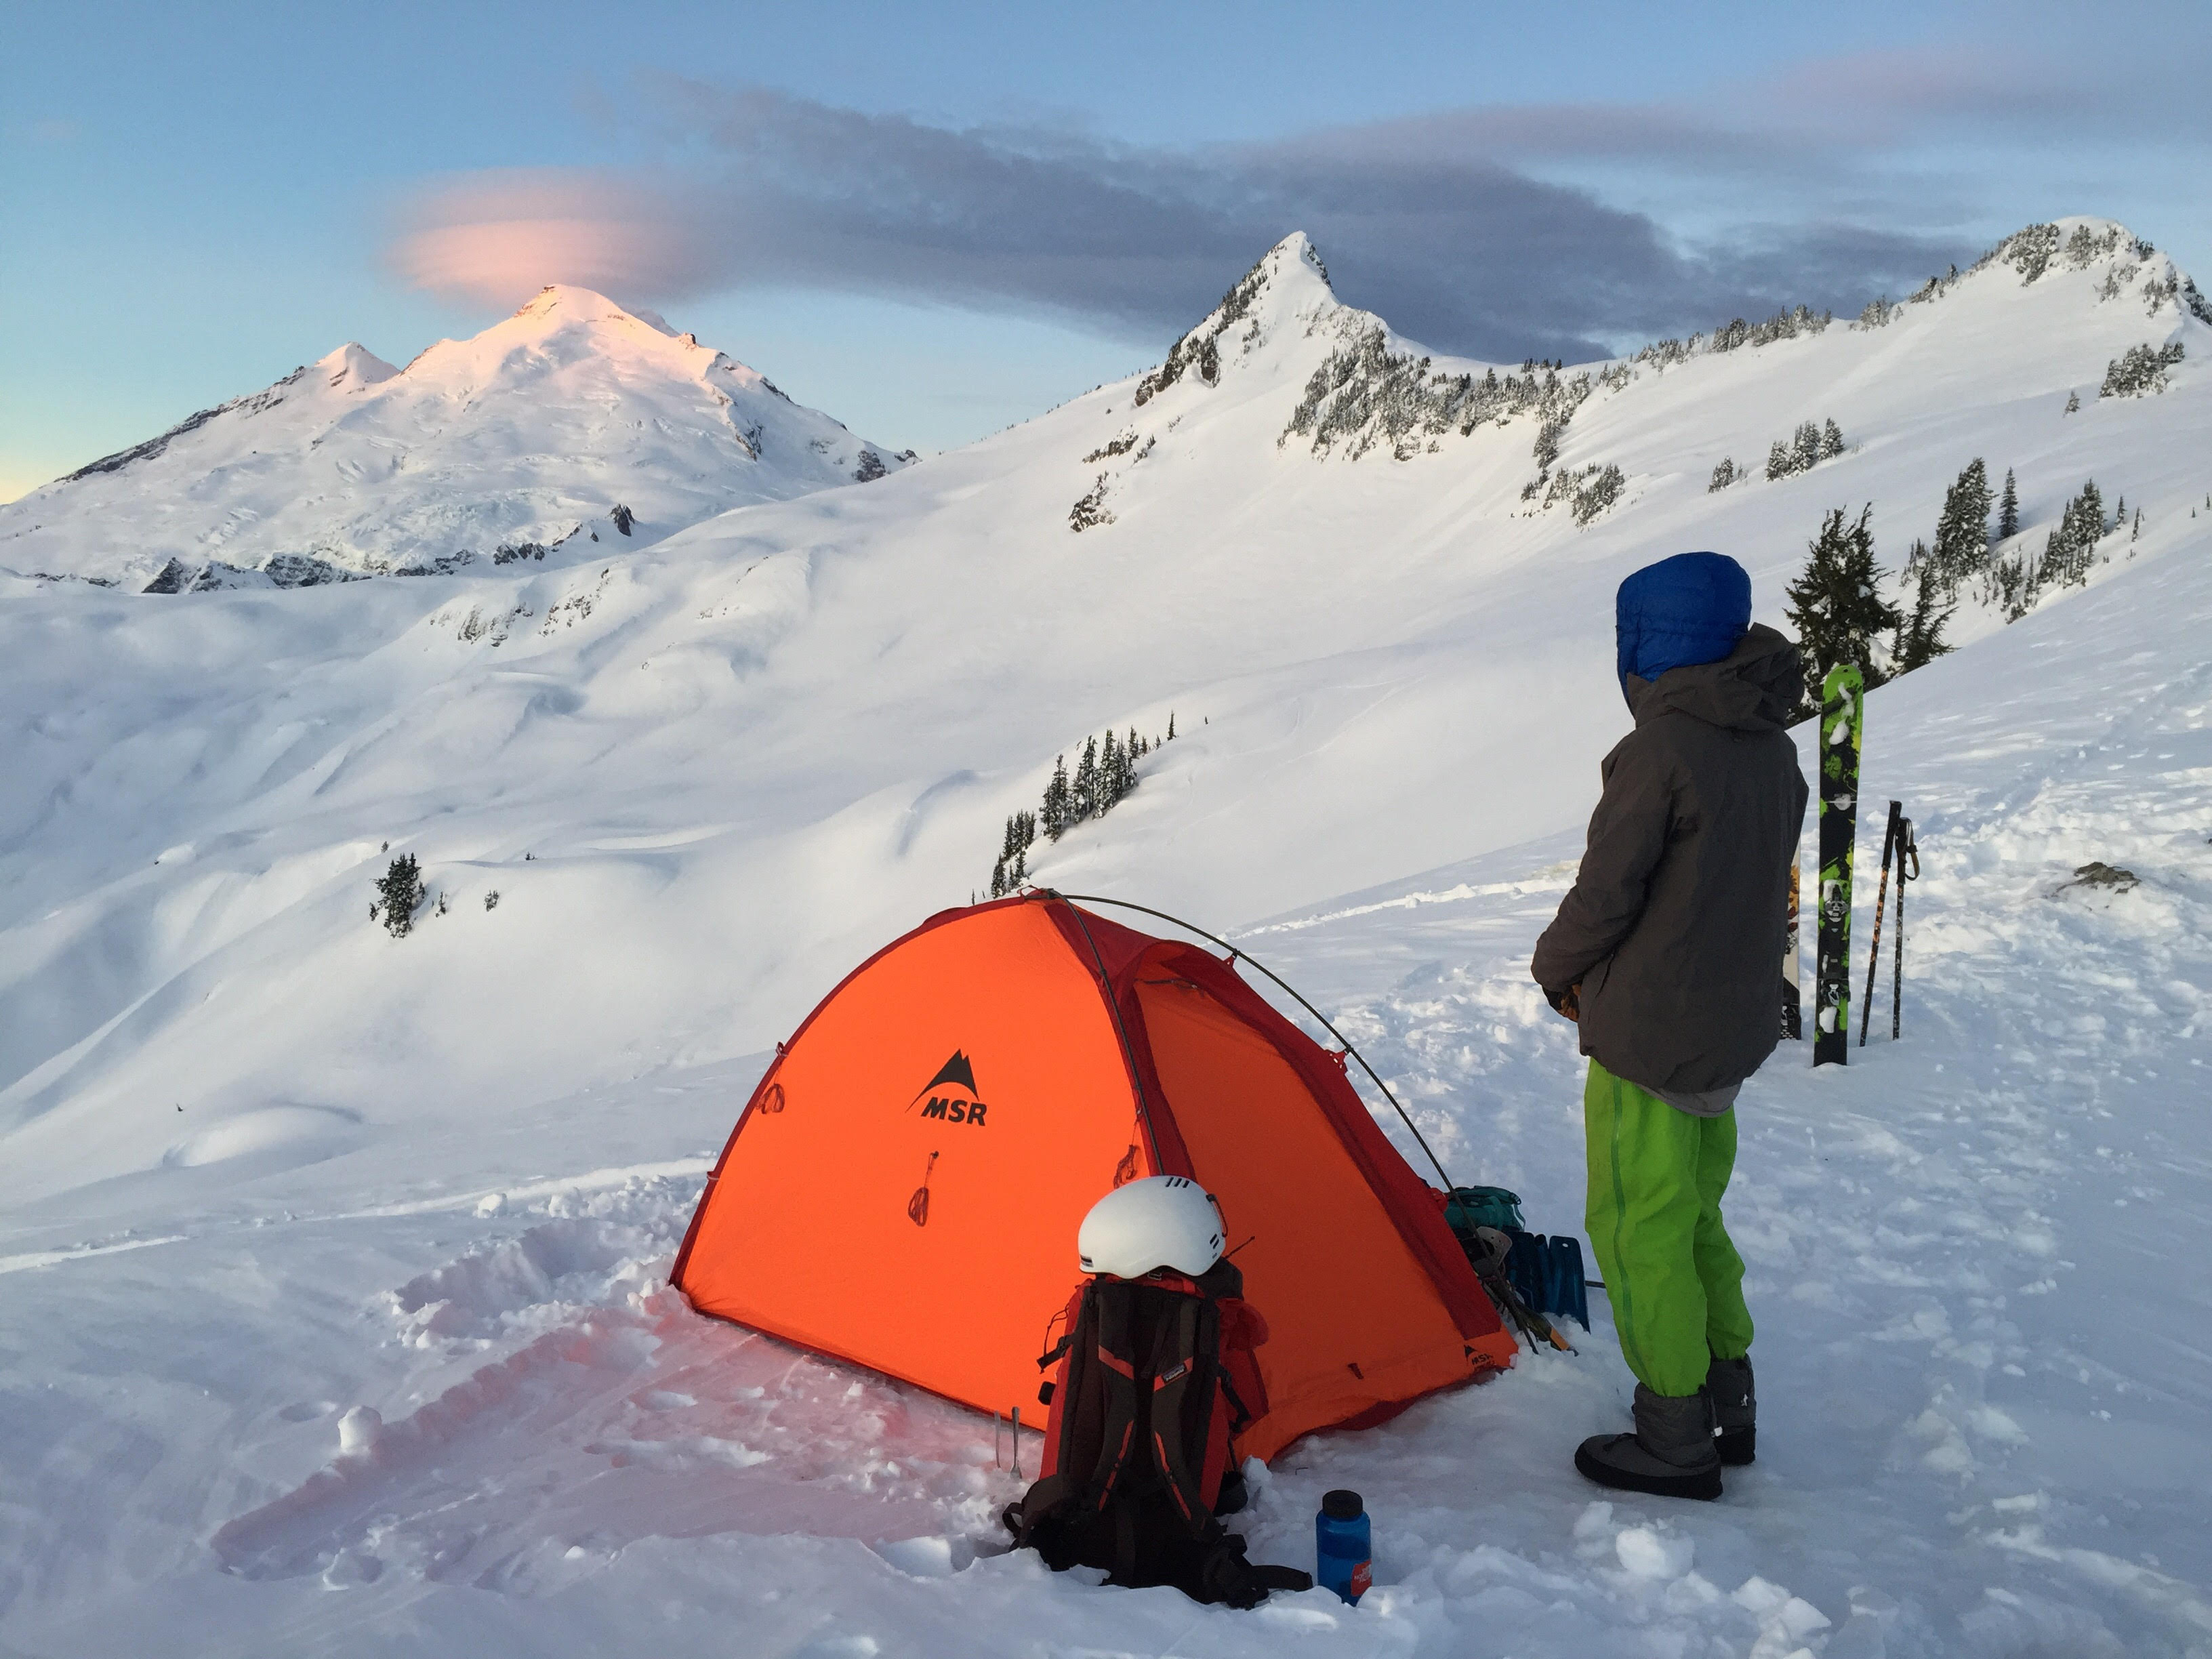 Viewing the sunrise on Mt. Baker with the MSR Advance Pro 2 Ultralight tent. [Photo] Mallorie Estenson